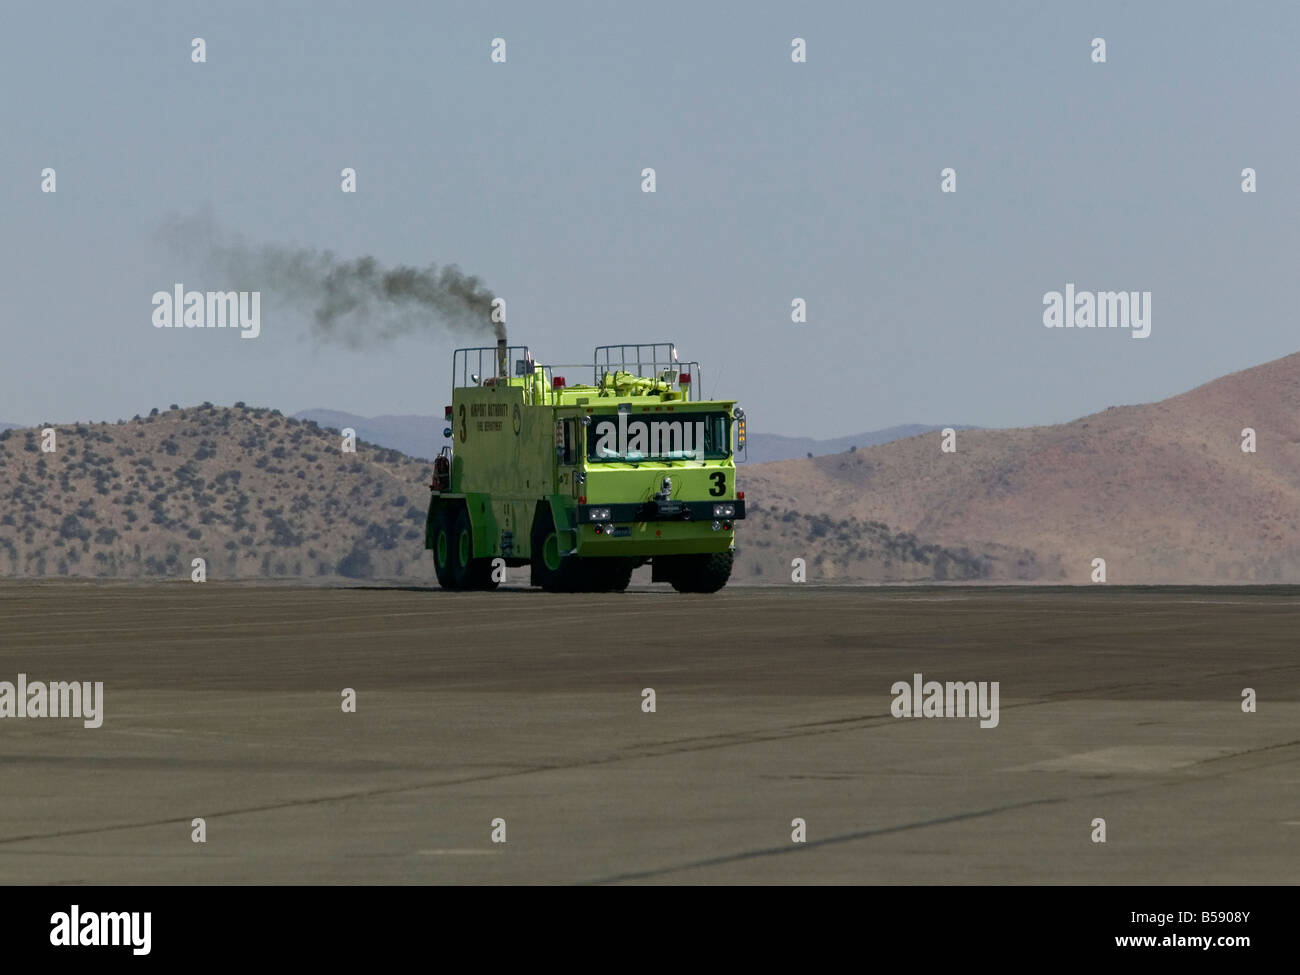 Airport Fire engine Tender driving to stand by position on runway Stock Photo